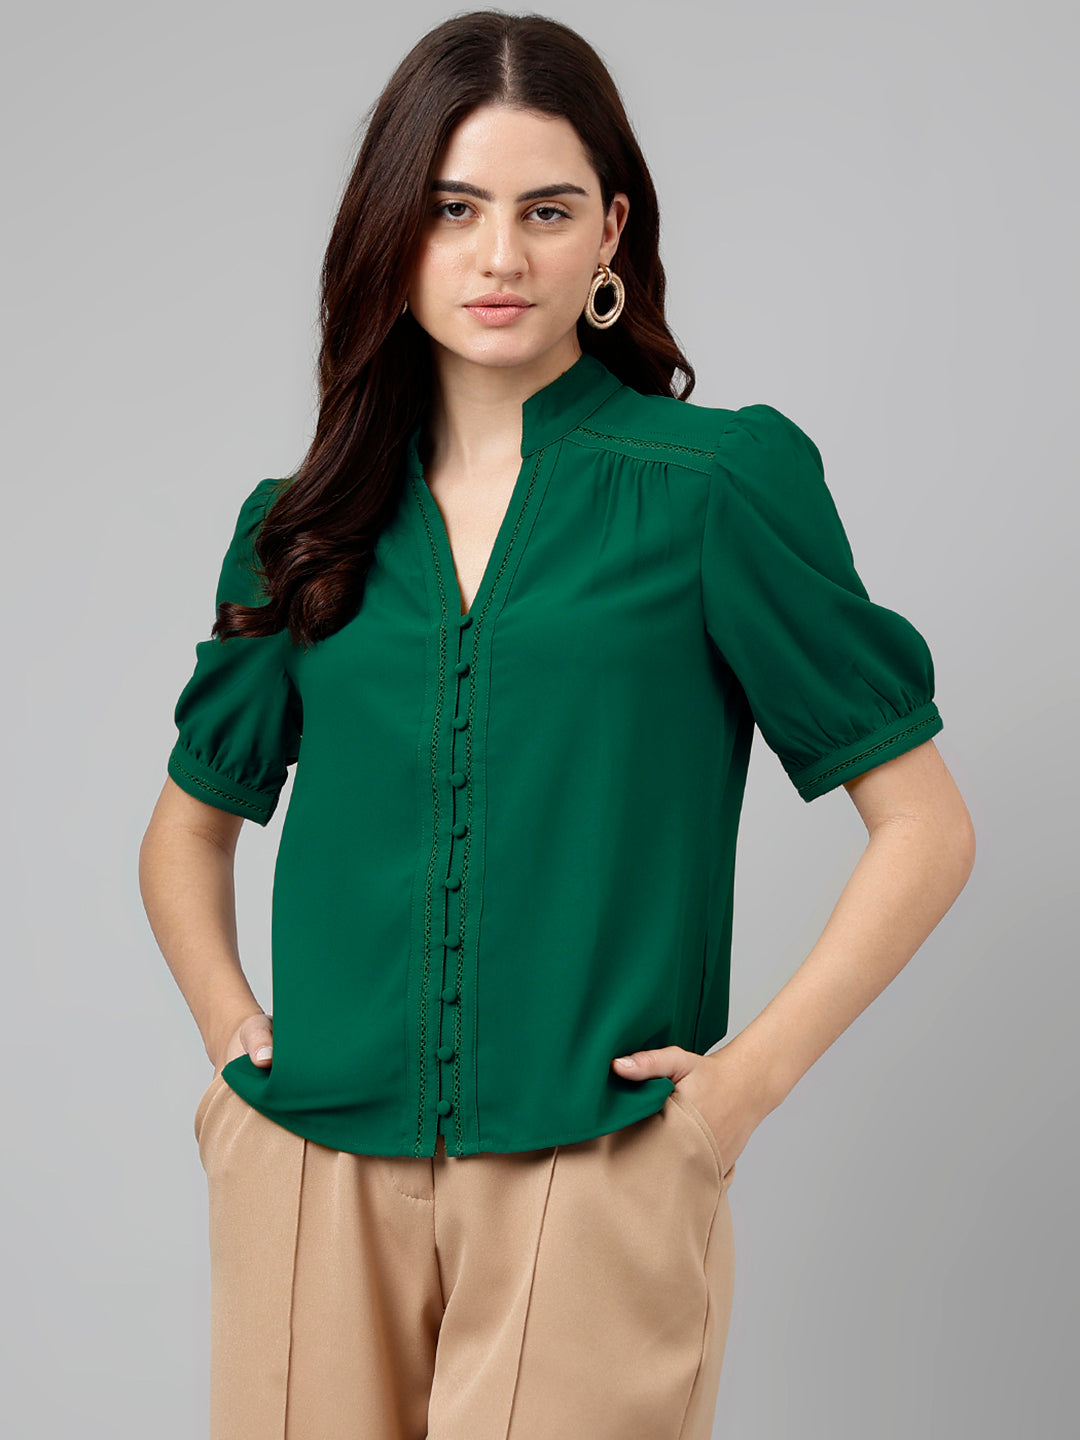 Green Solid Polyester Top